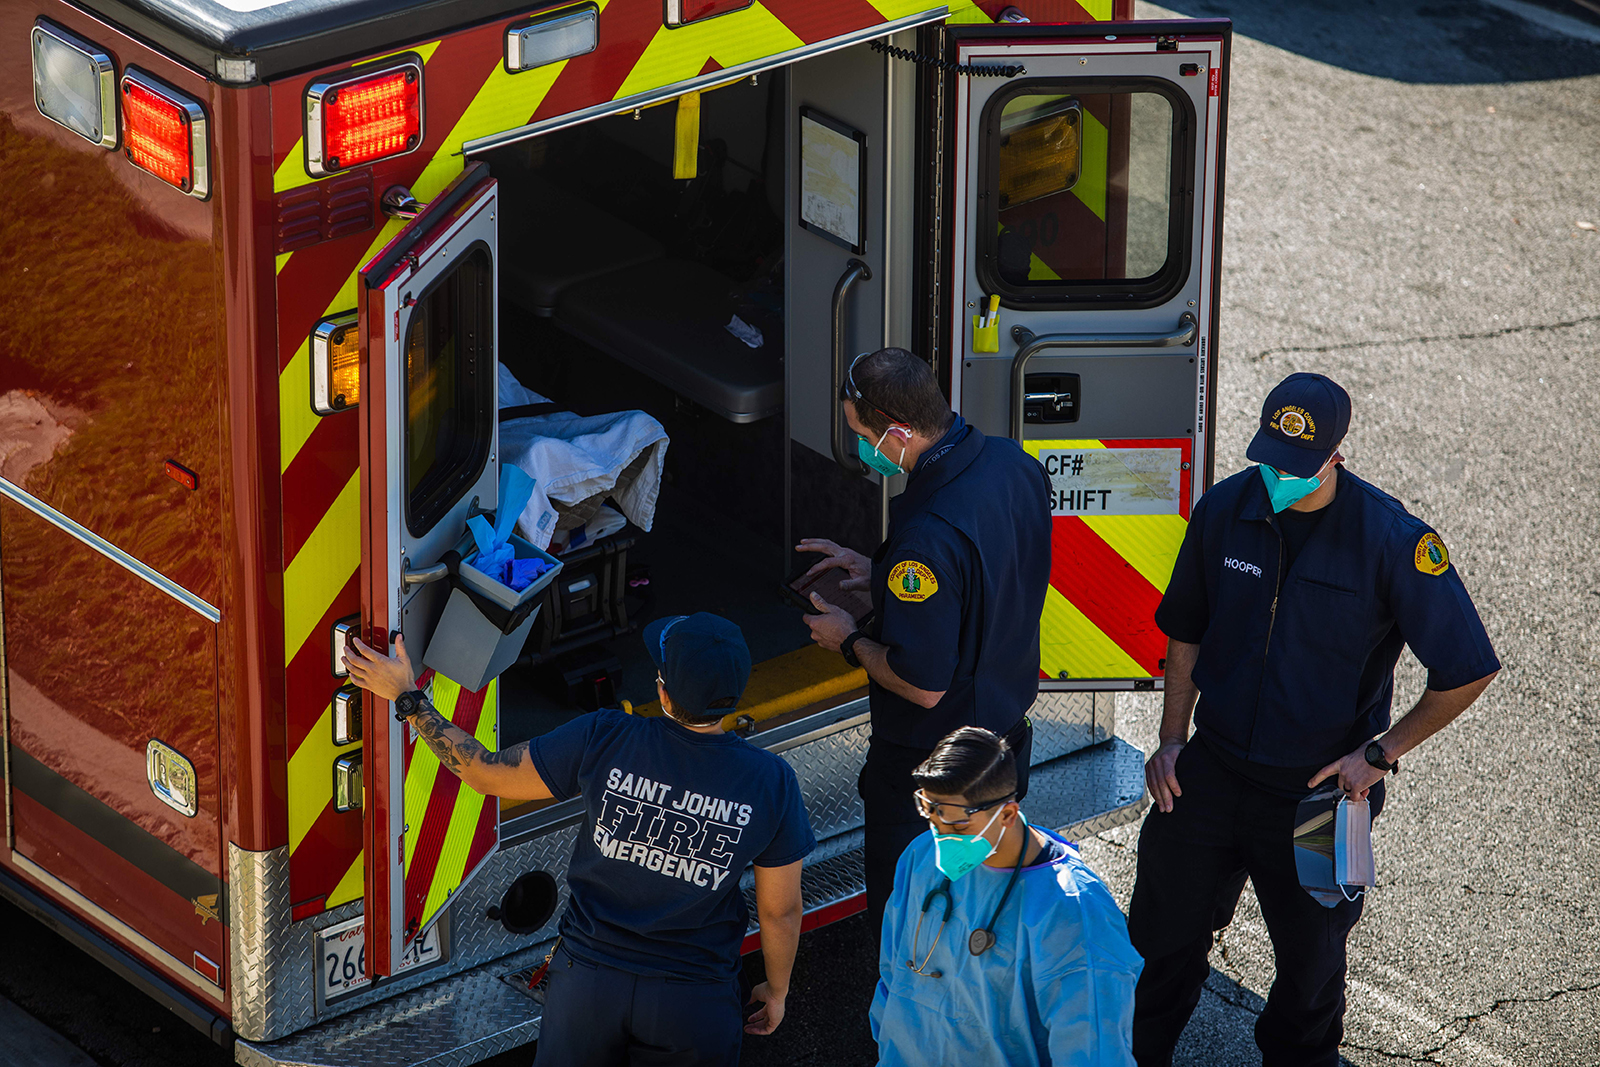 After administering him with oxygen, County of Los Angeles paramedics load a potential Covid-19 patient in the ambulance before transporting him to a hospital in Hawthorne, California on December 29, 2020.